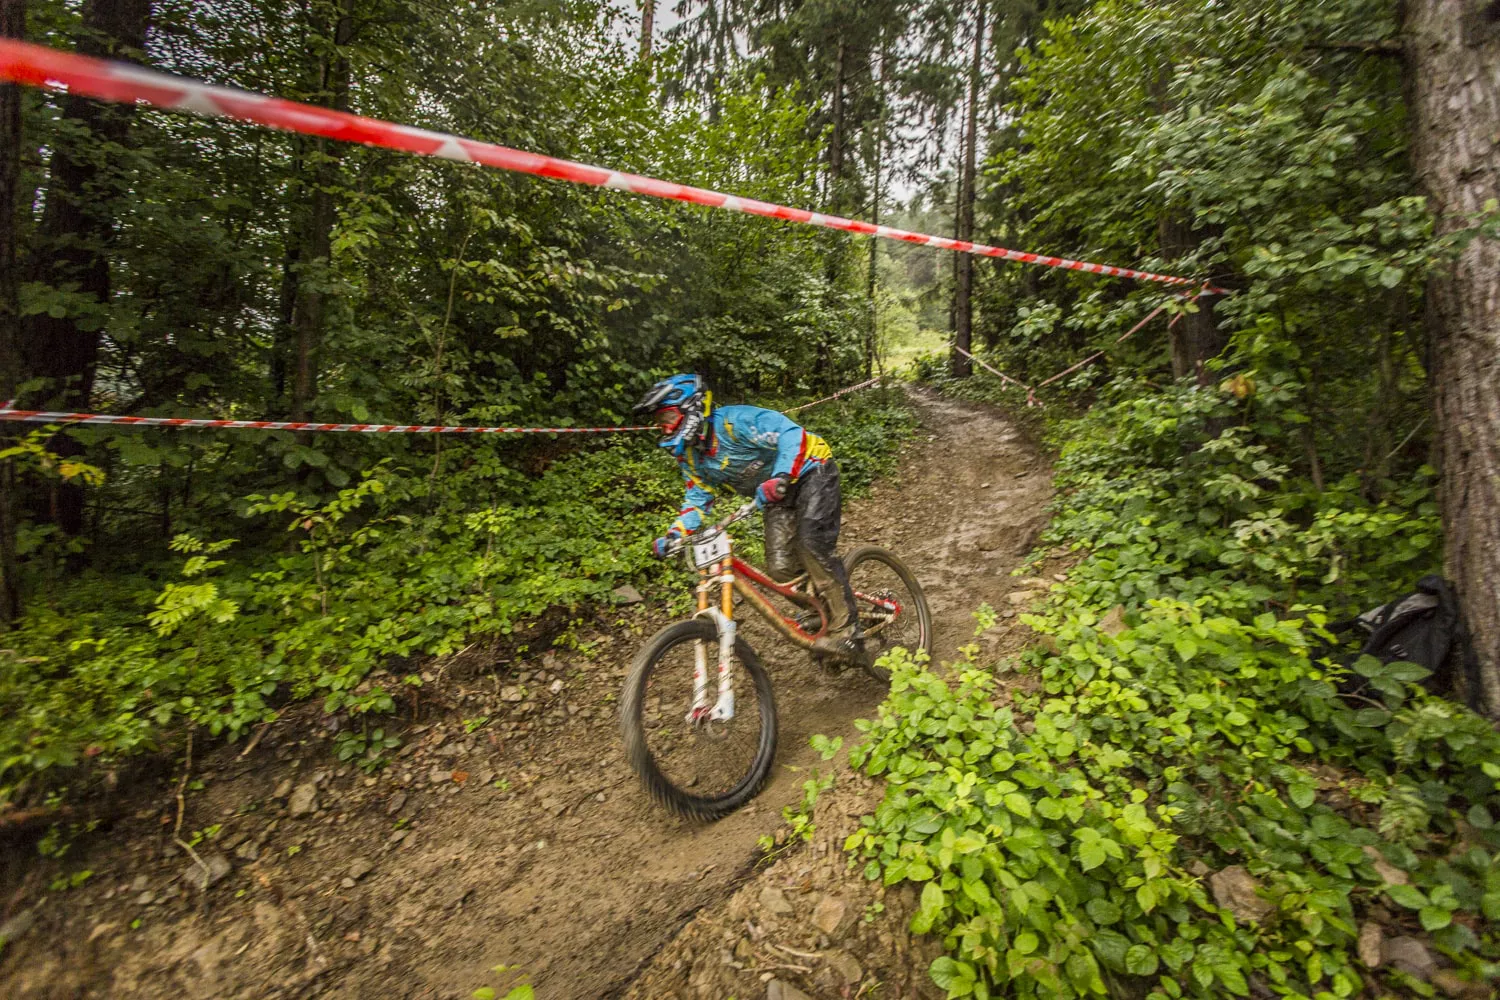 A helmeted mountain biker darting down a muddy forest path on a red mountain bike; surrounded by shrubs and trees, the path is lined with strips of red-and-white tape.